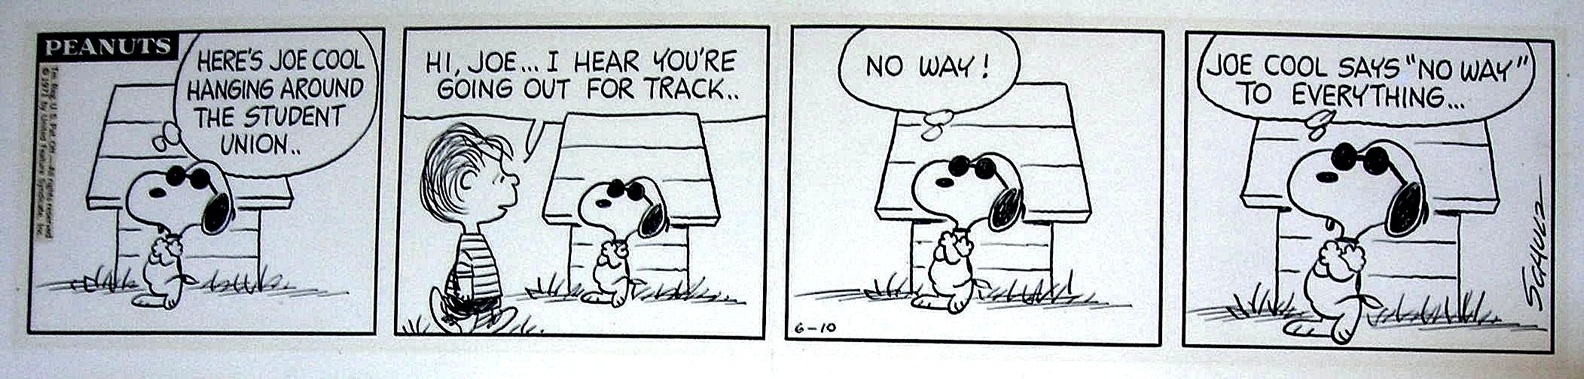 Peanuts Daily With The 4th Appearance Of Snoopy As Joe Cool 10 June 1971 In C E S Schulz Charles Peanuts Comic Art Gallery Room